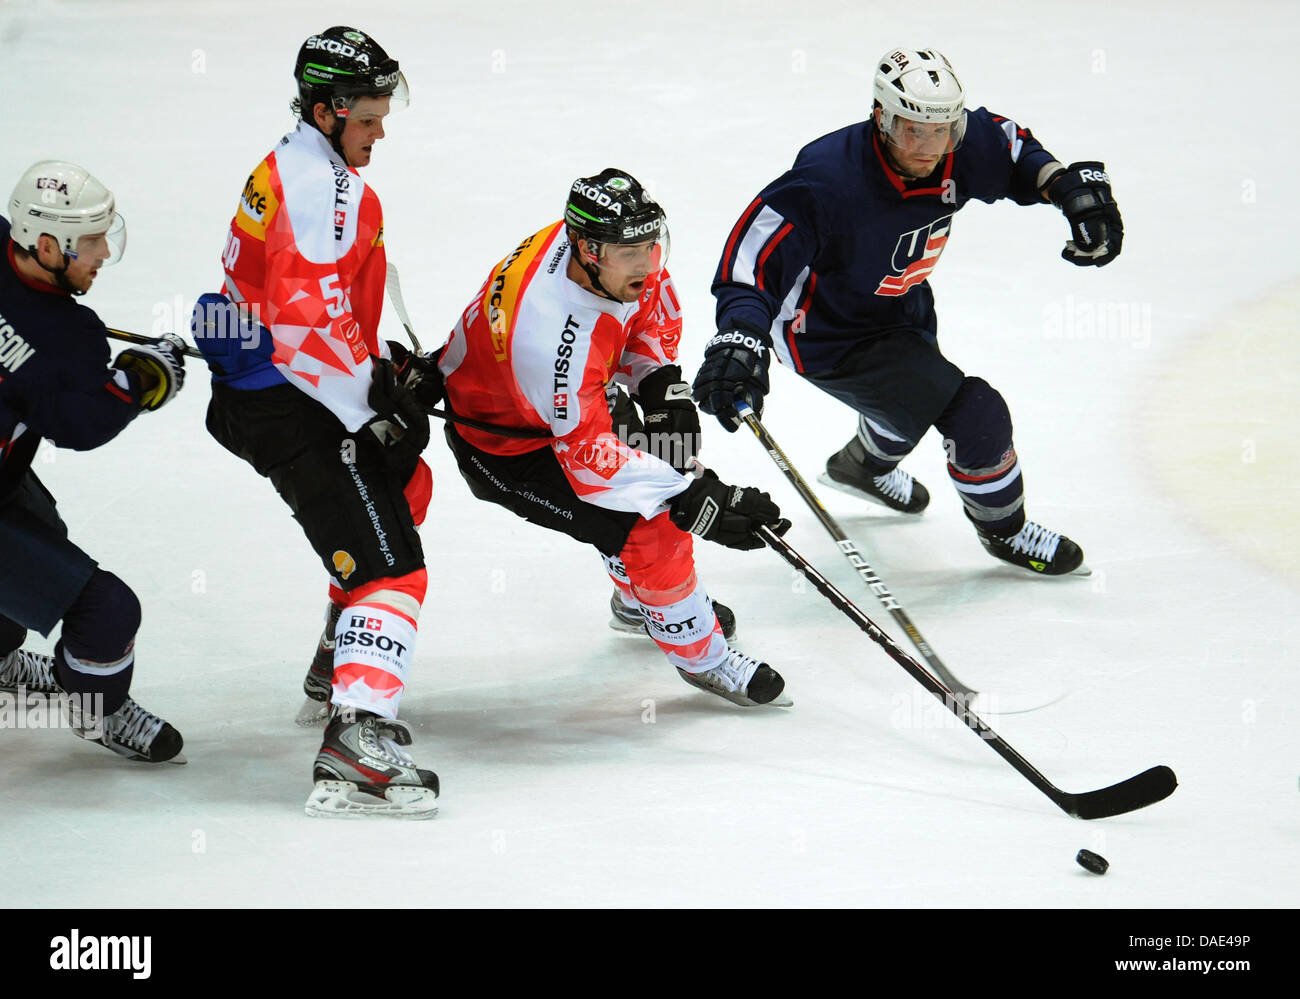 Swiss hockey players Dino Wieser (2nd L) and Daniel Rubin (2nd R) vie for  the pouck with US hockey player Noah Clarke (R) during the Deutschland Cup  ice hockey match between Switzerland